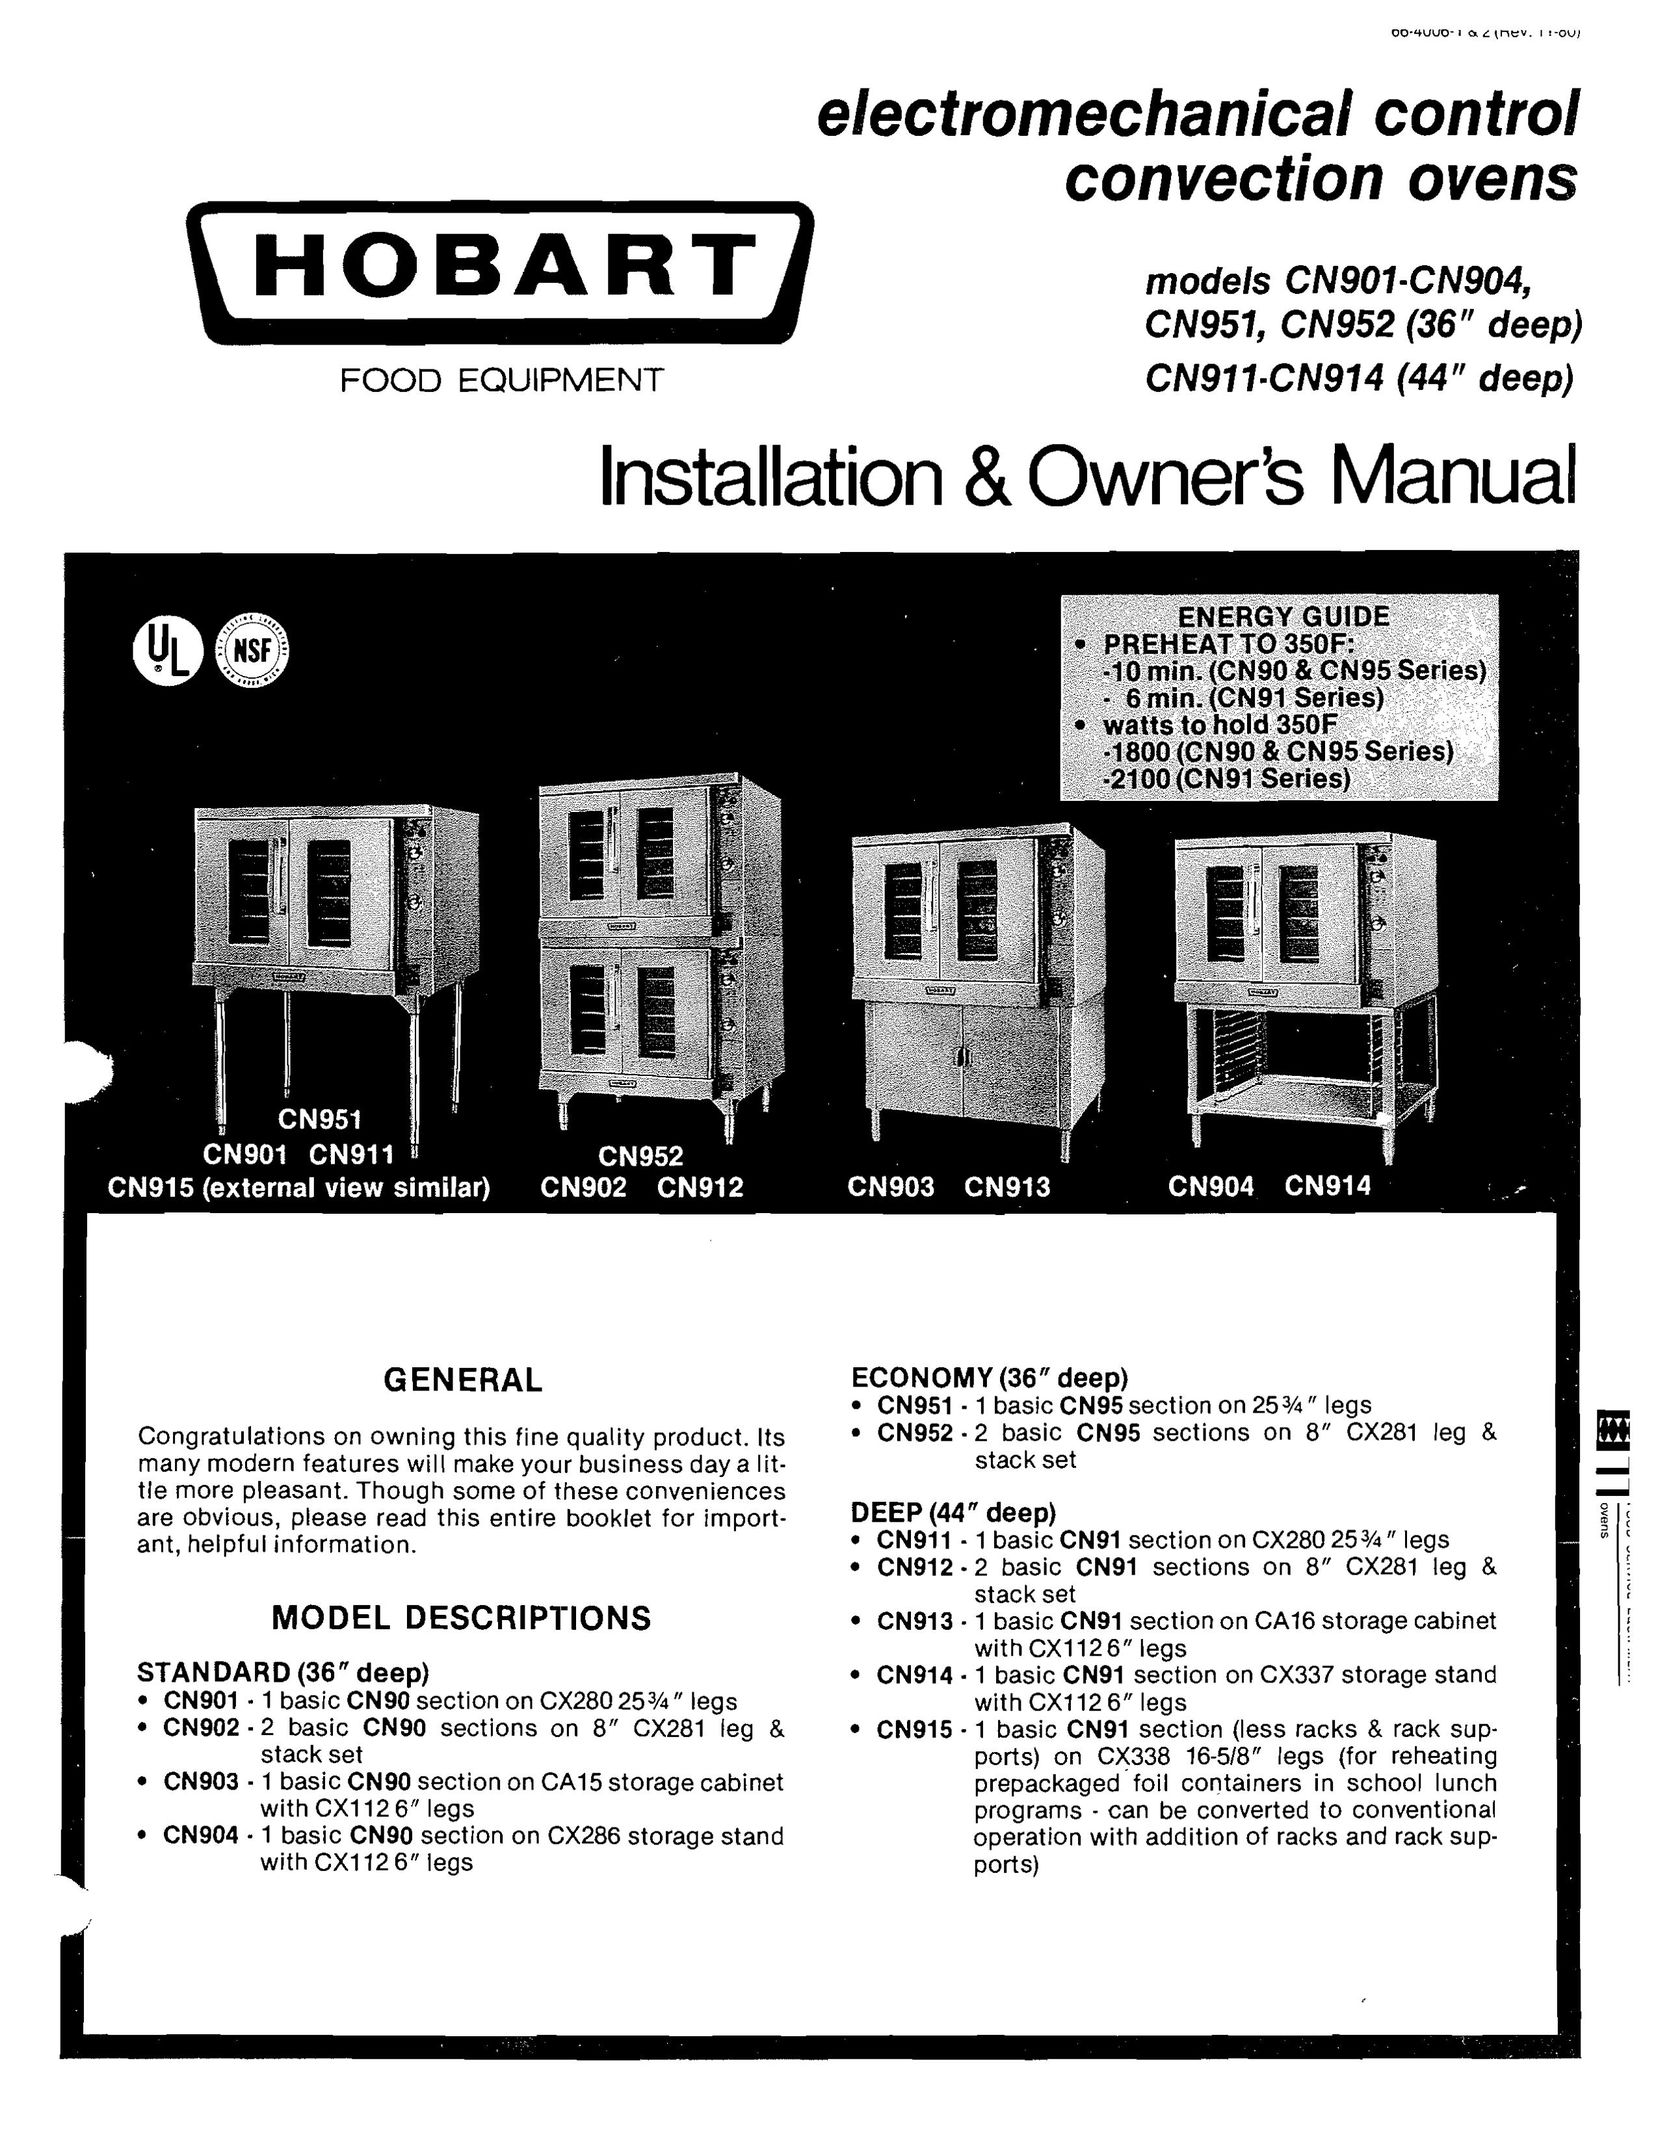 Hobart CN952 Convection Oven User Manual